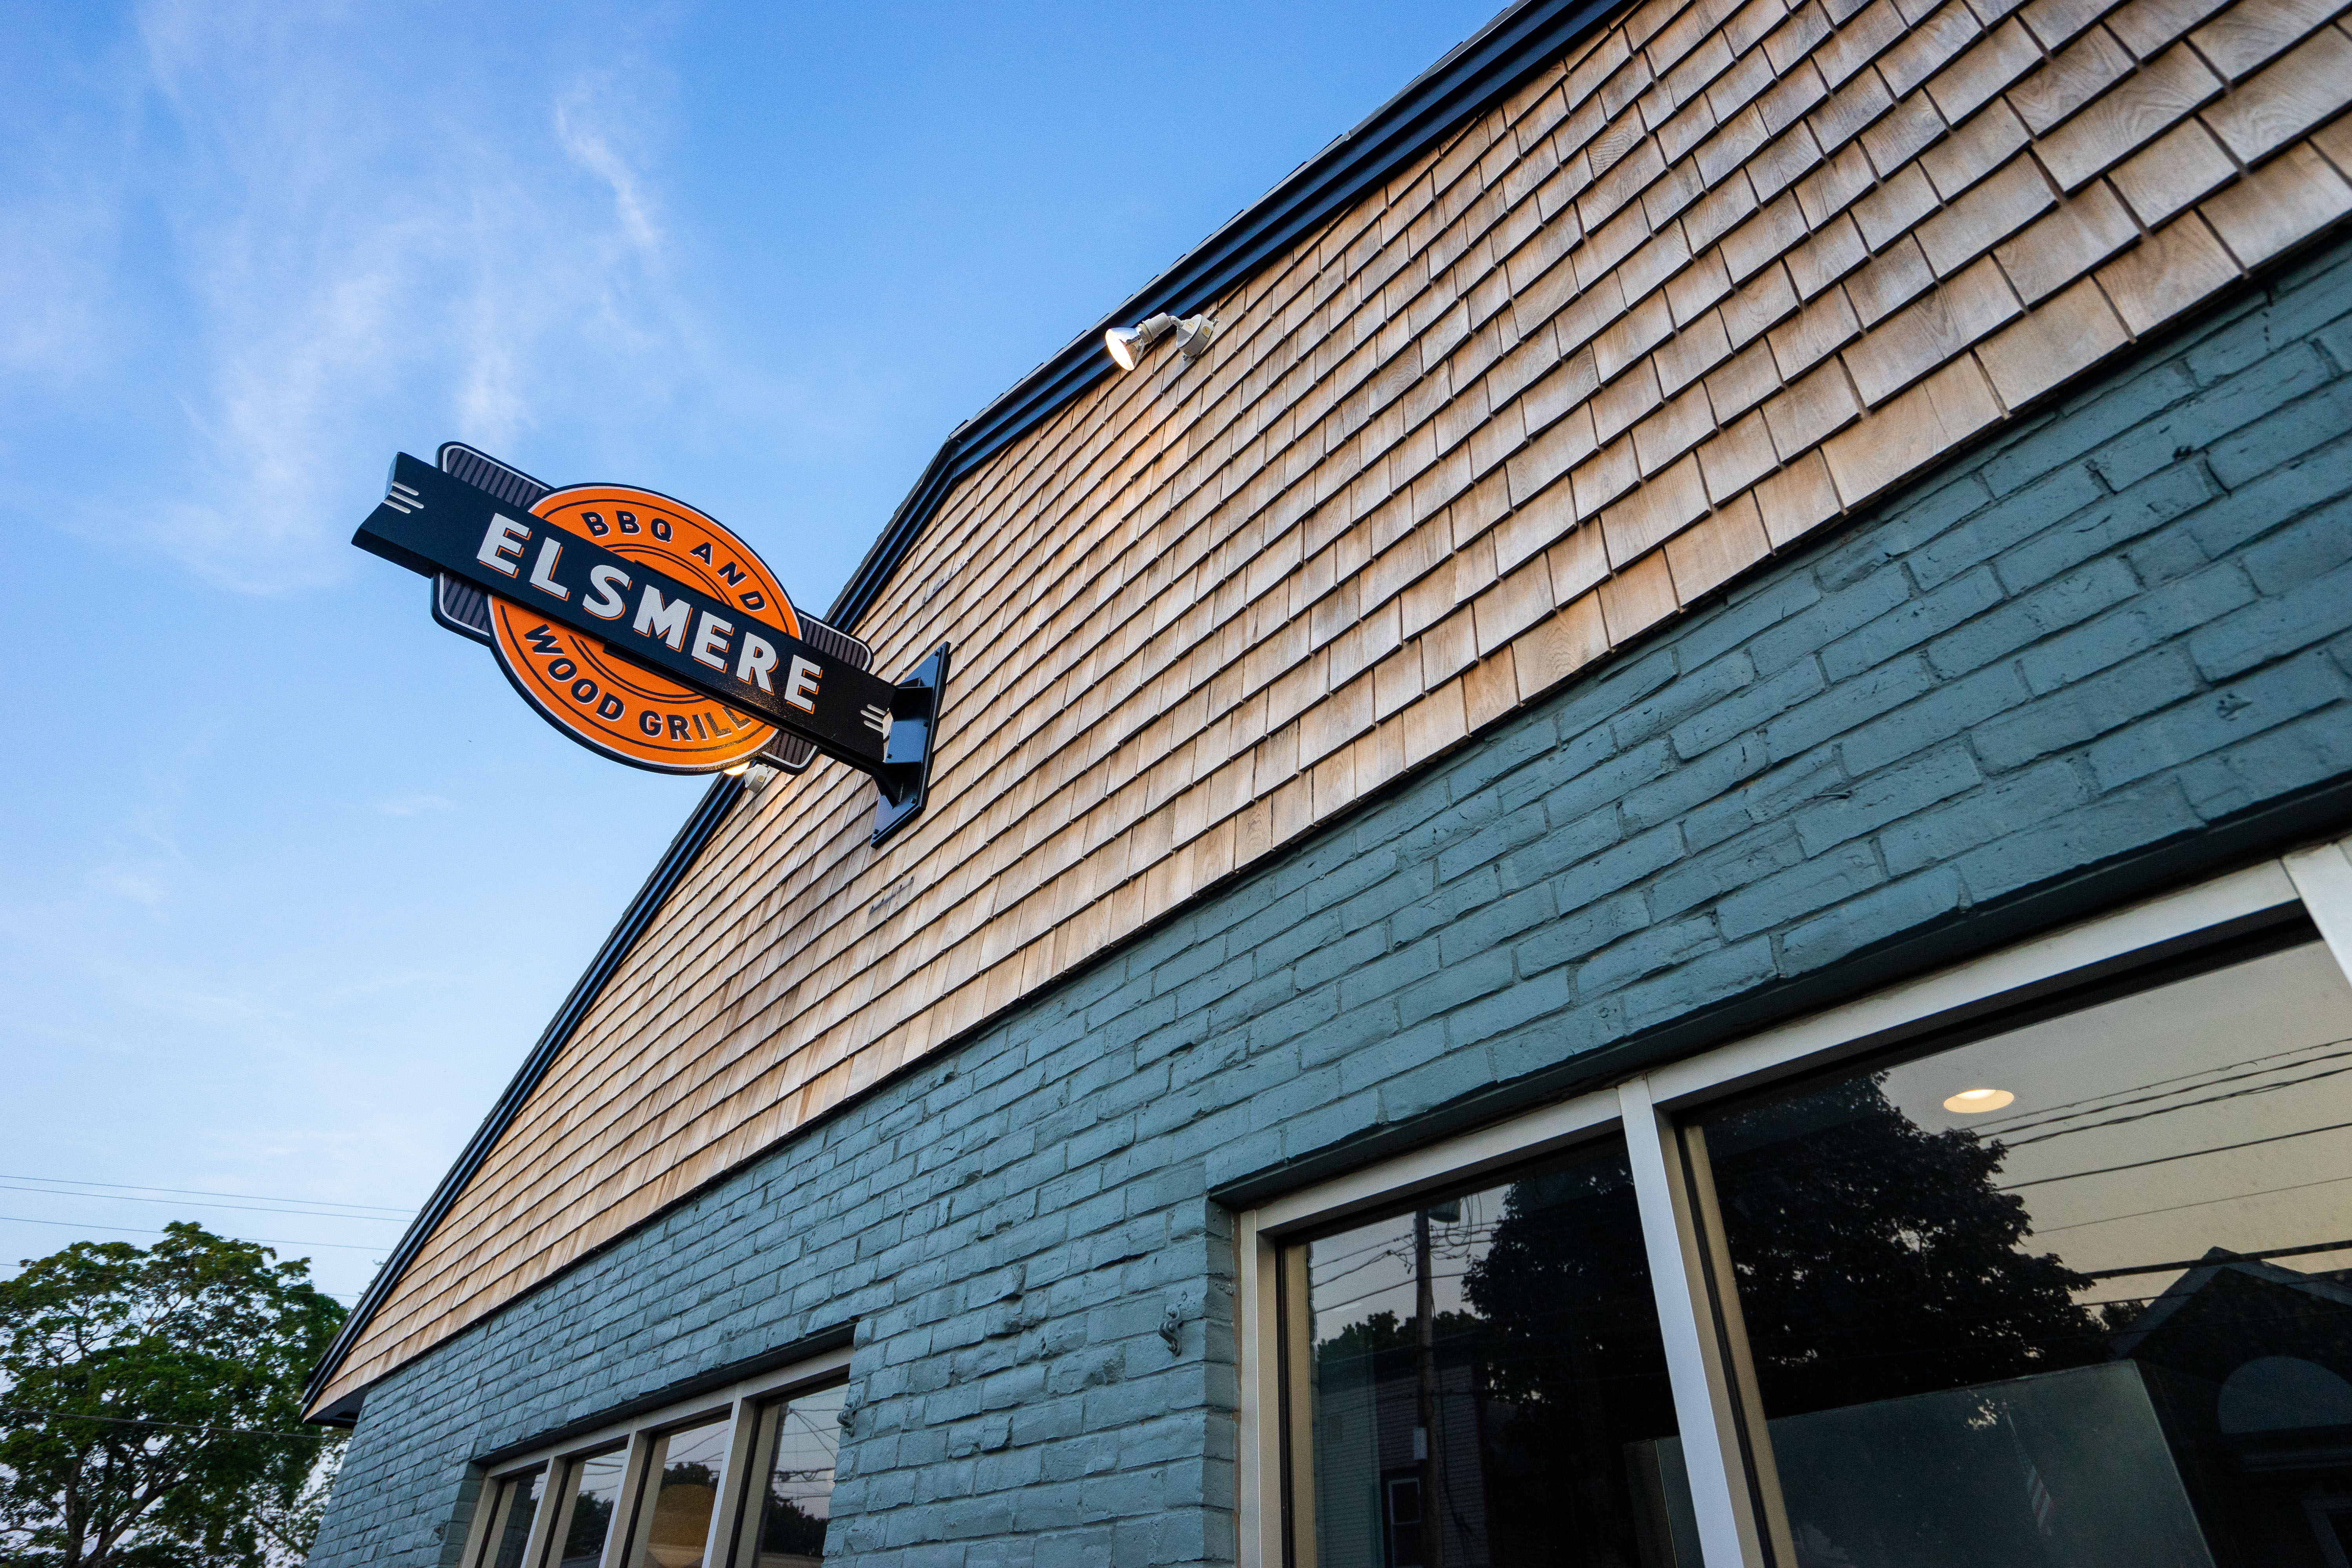 Elsmere BBQ and Wood Grill | Stevens Square neighborhood | Over 55 Communities